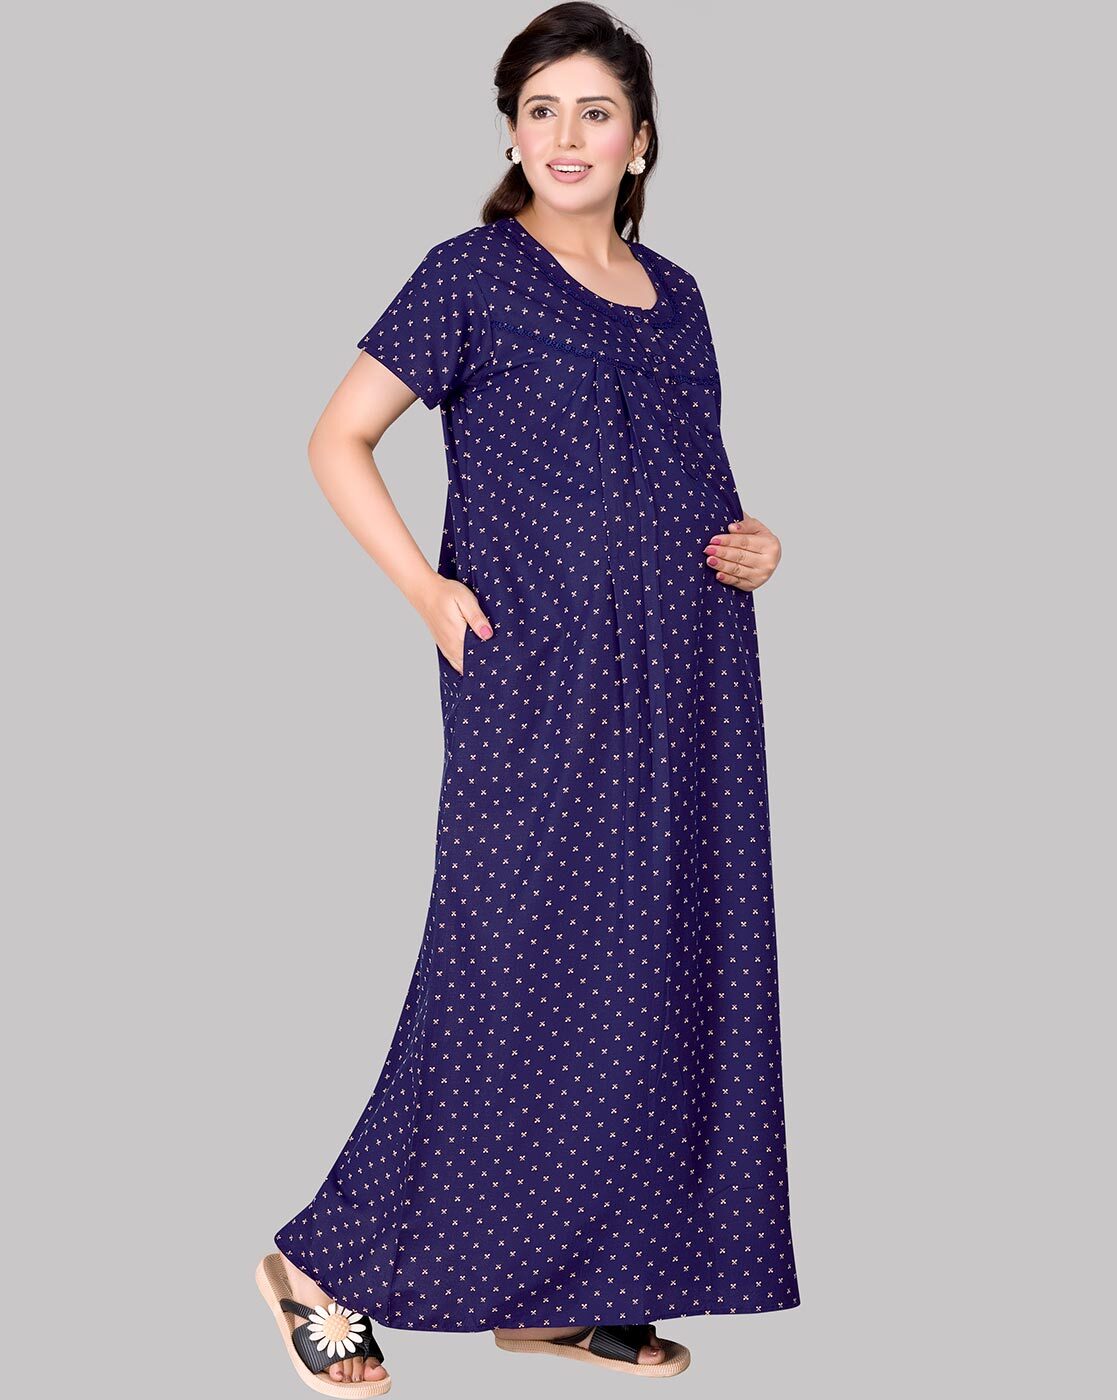 Buy Morph Maternity Night Gowns Online at Best Prices in India - JioMart.